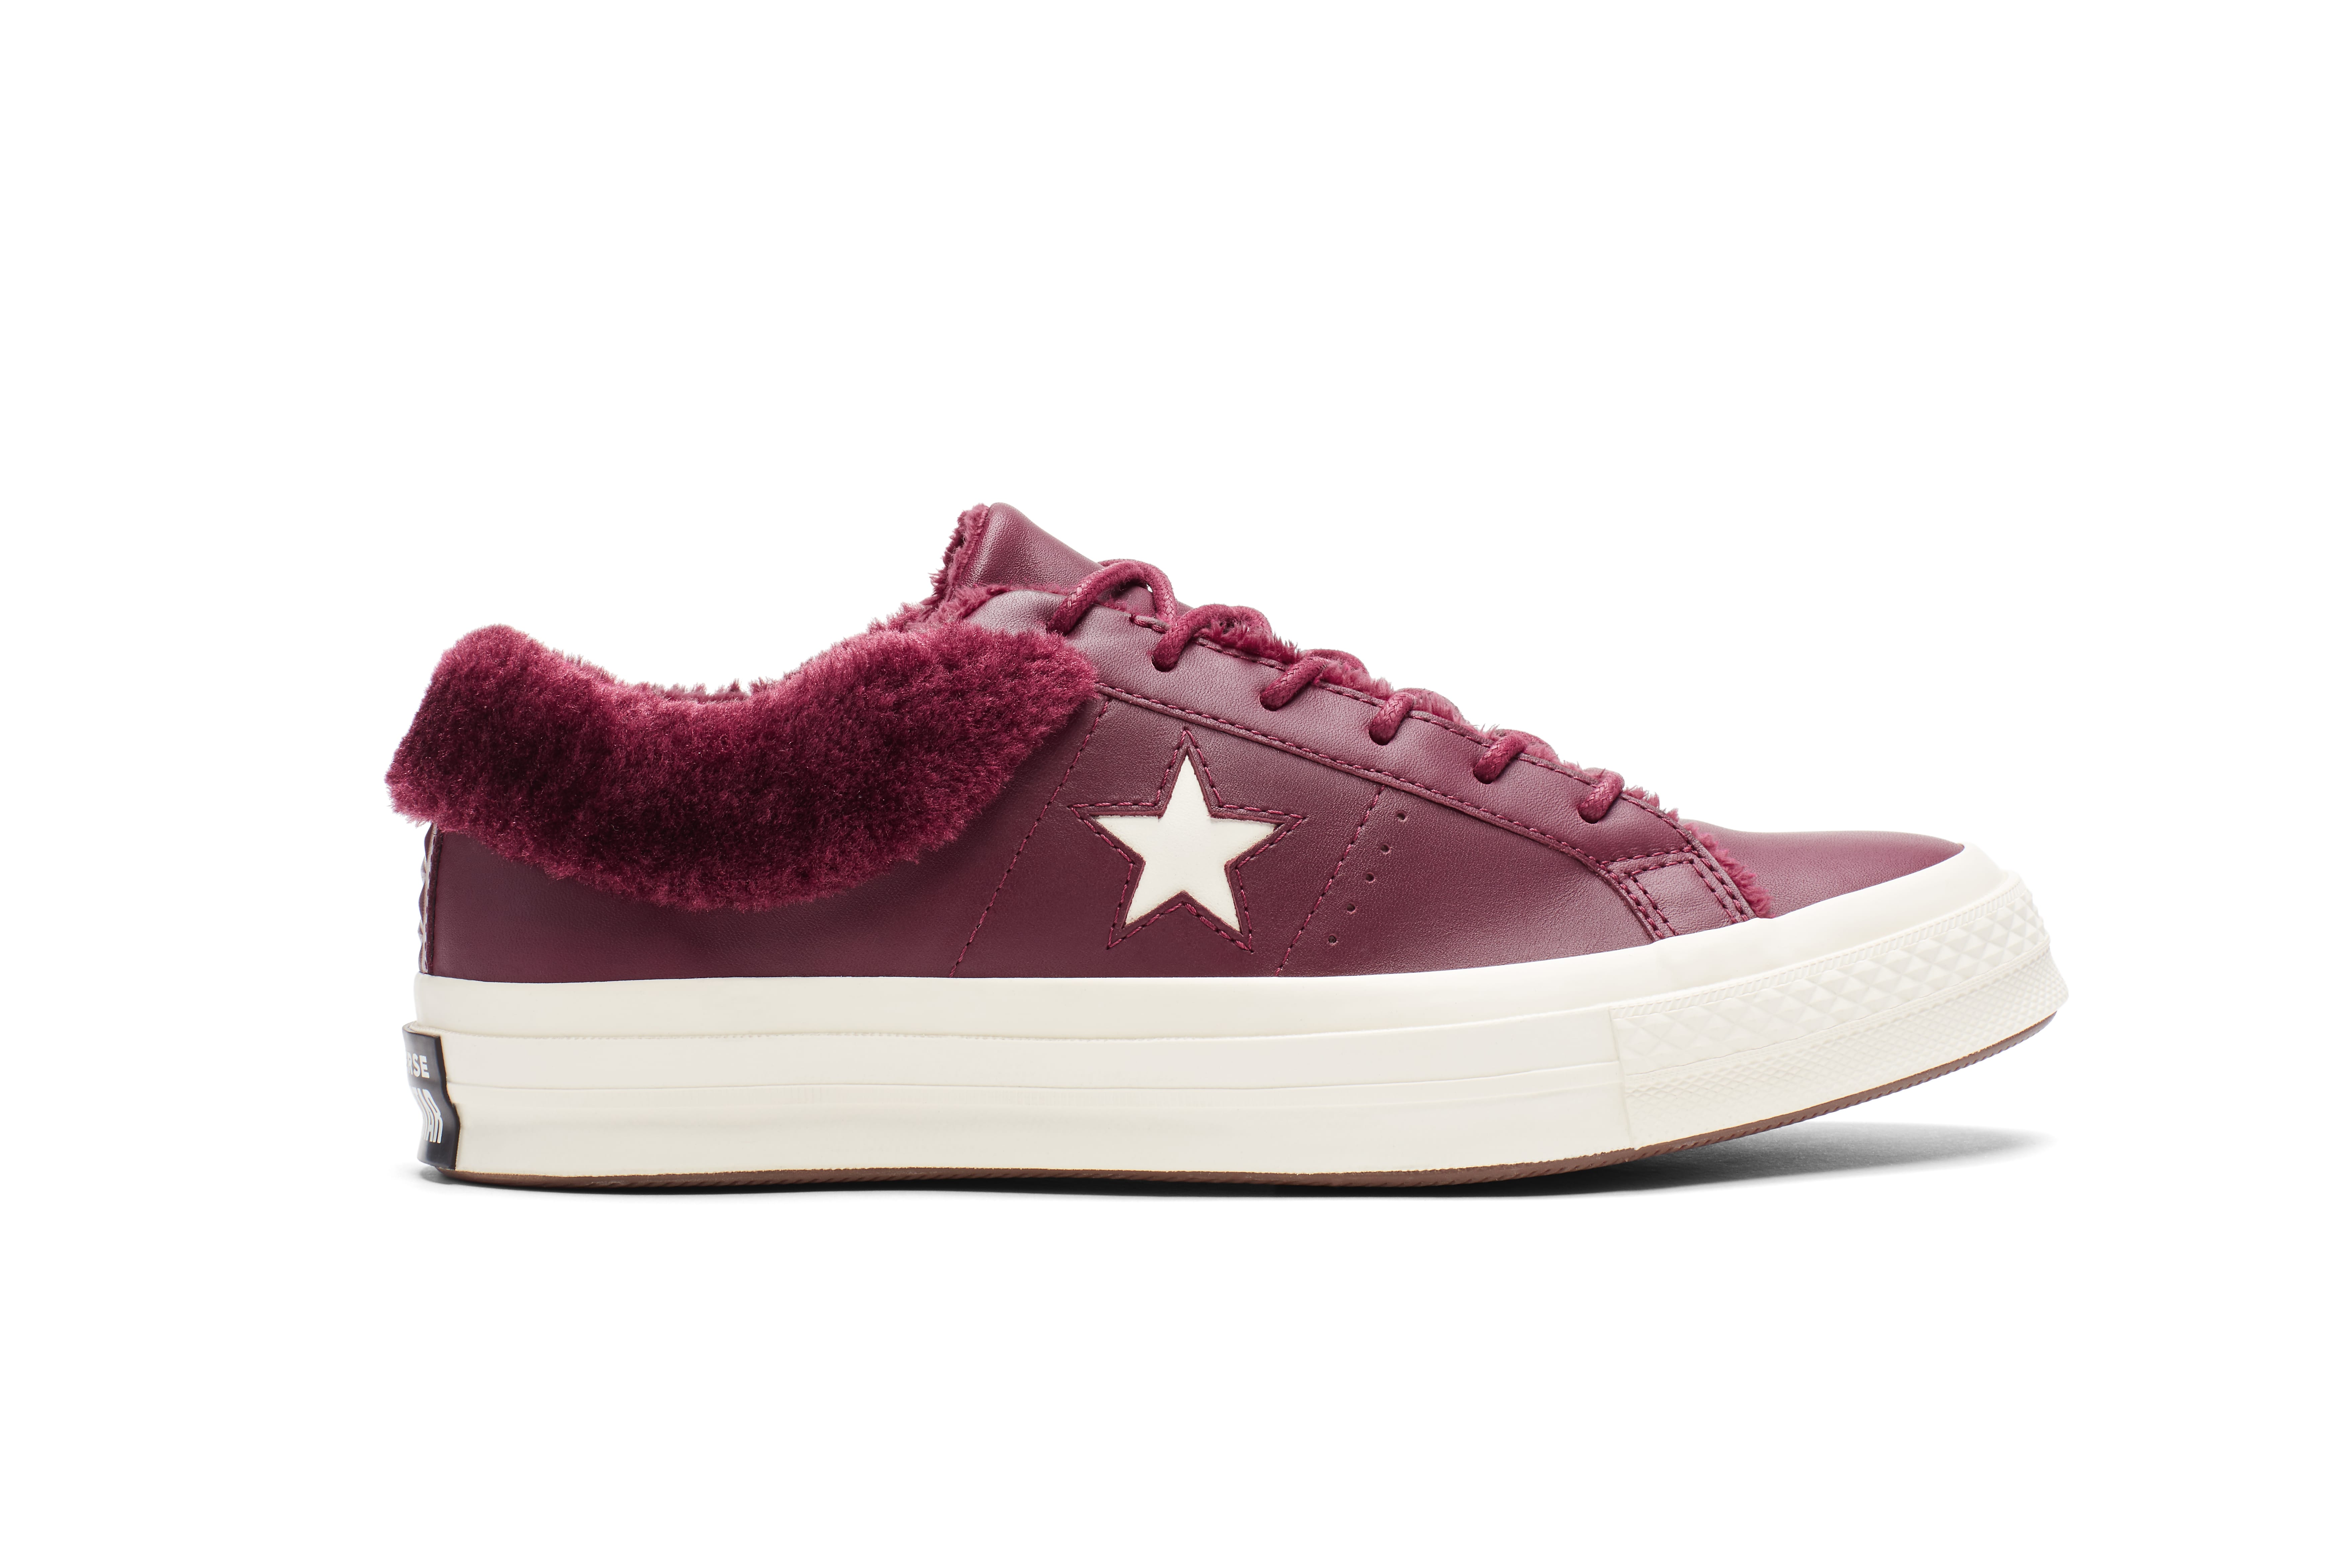 Converse One Star Fur-Lined Maroon and 